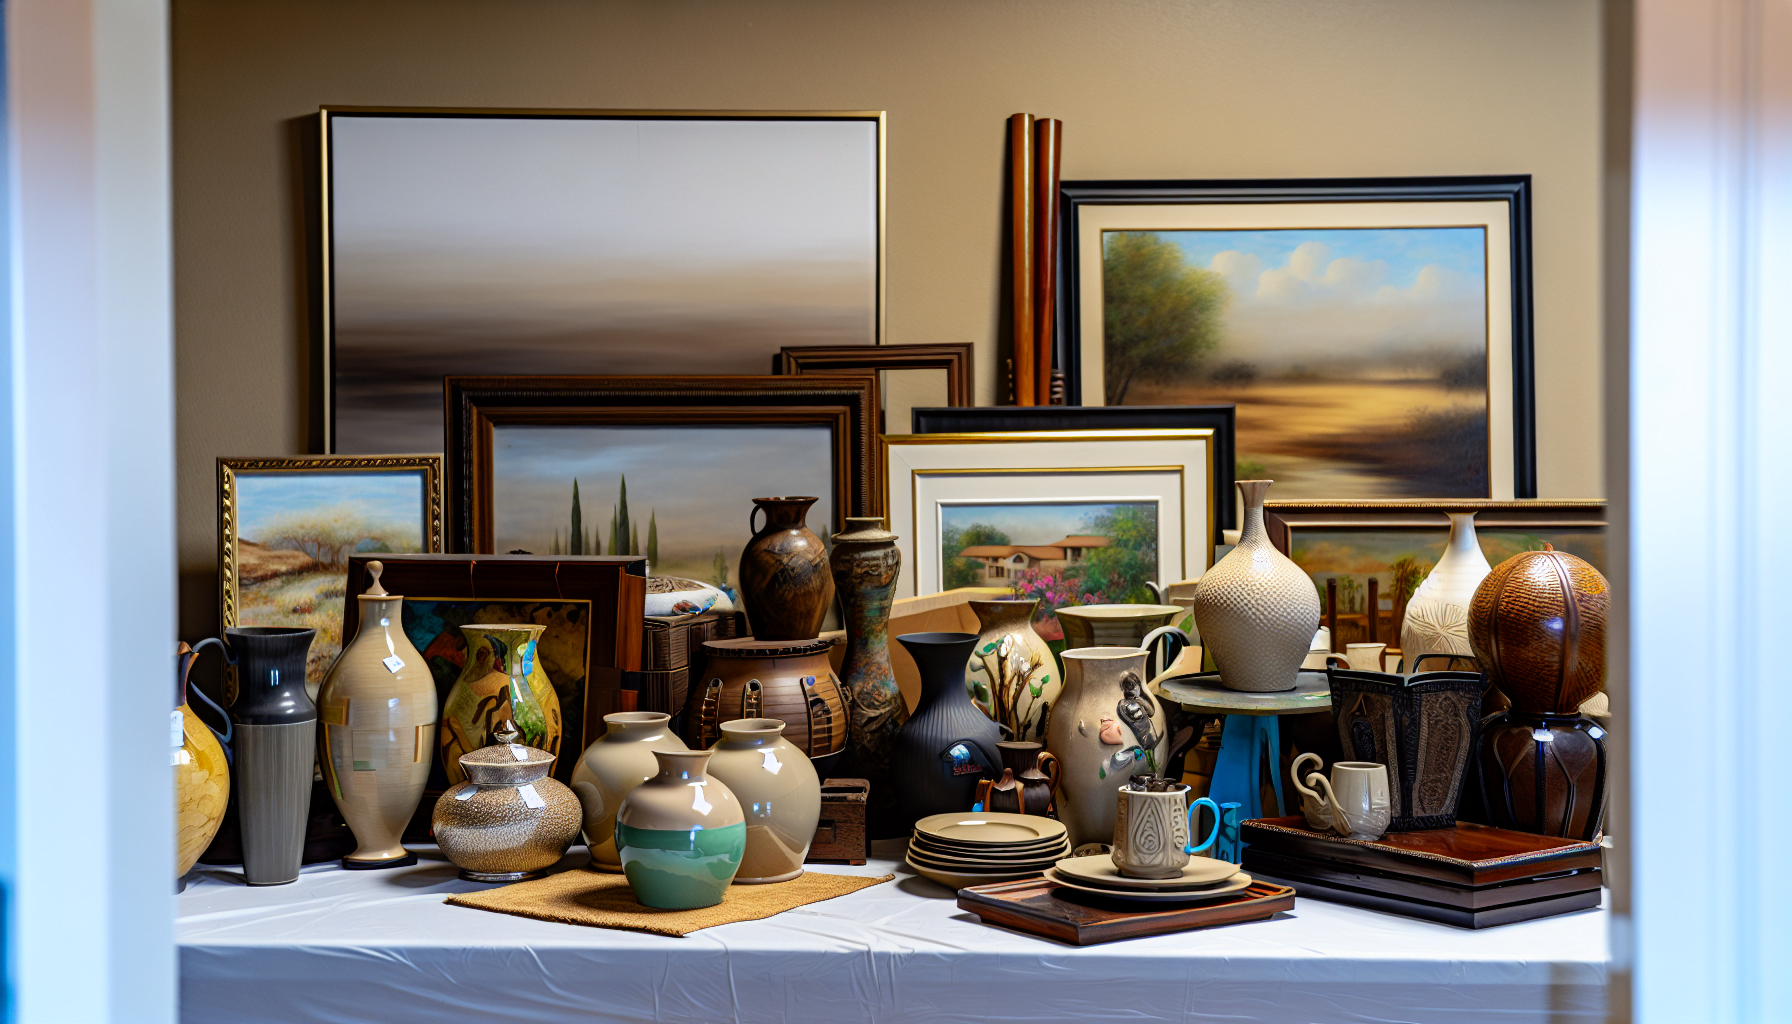 Donated home decor items including paintings, vases, and decorative pieces